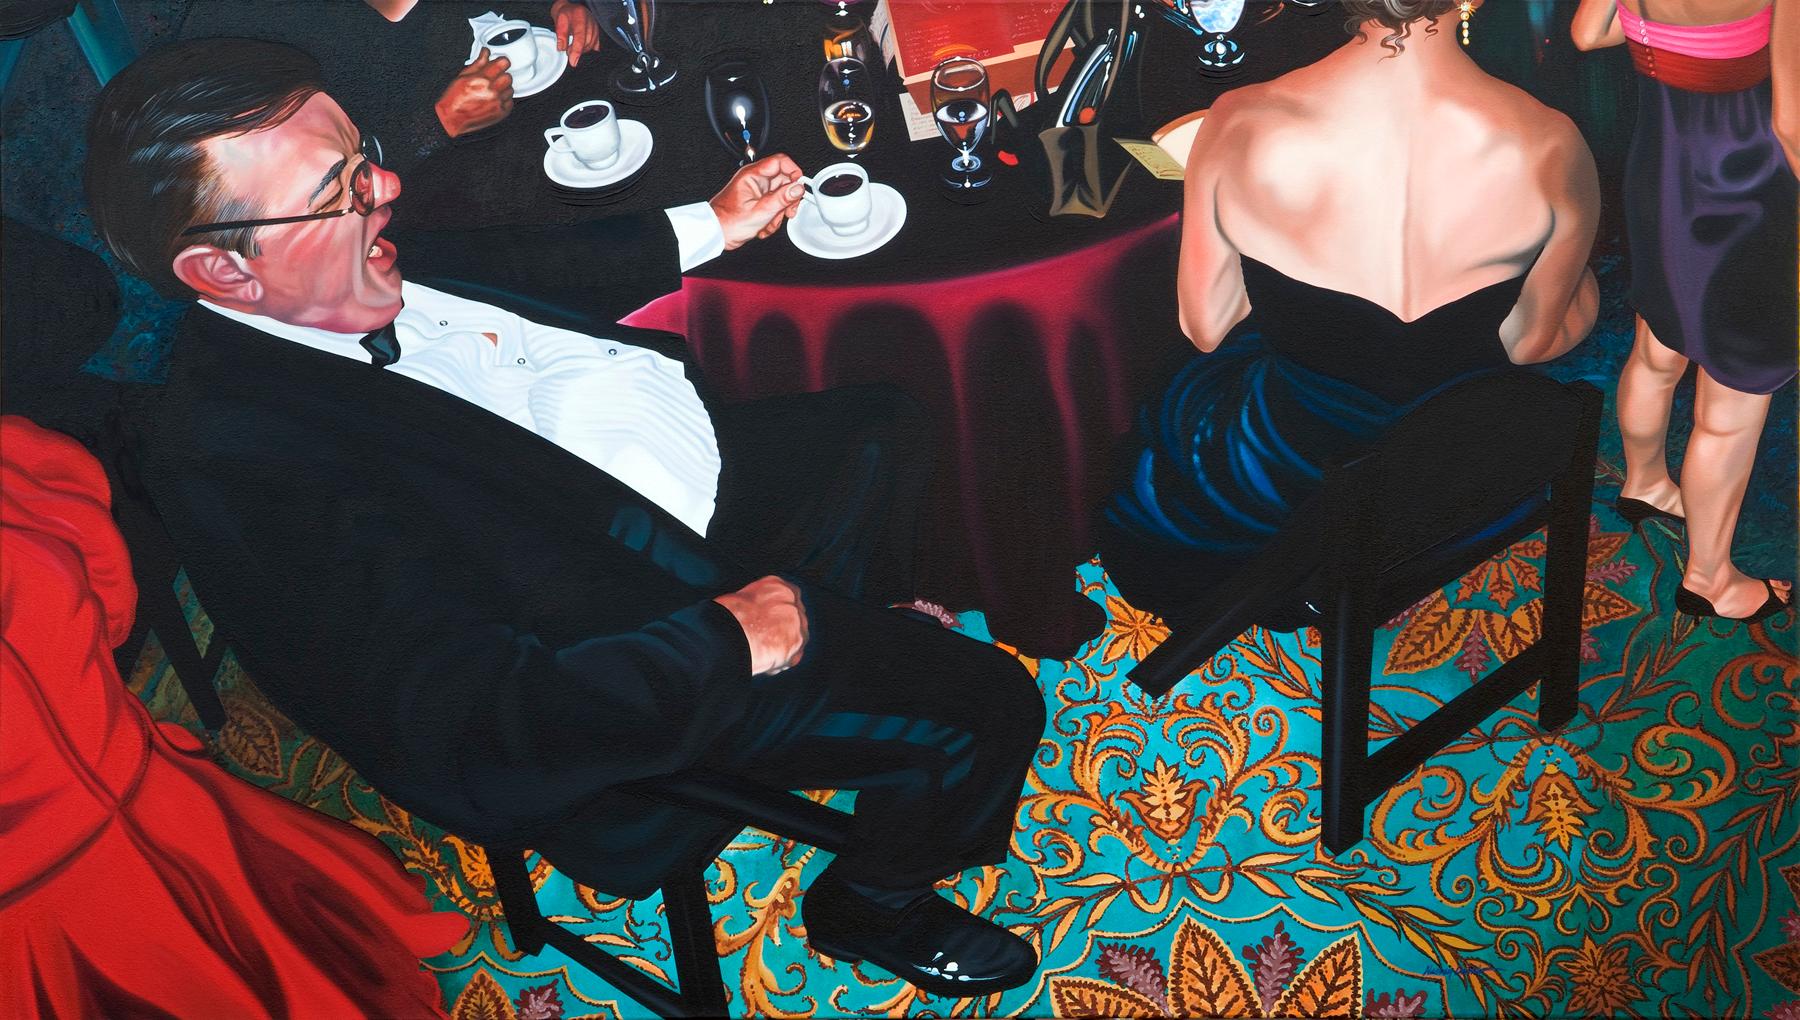 Contemporary Quirky Portrait of Party People with Incredible Carpet Detail